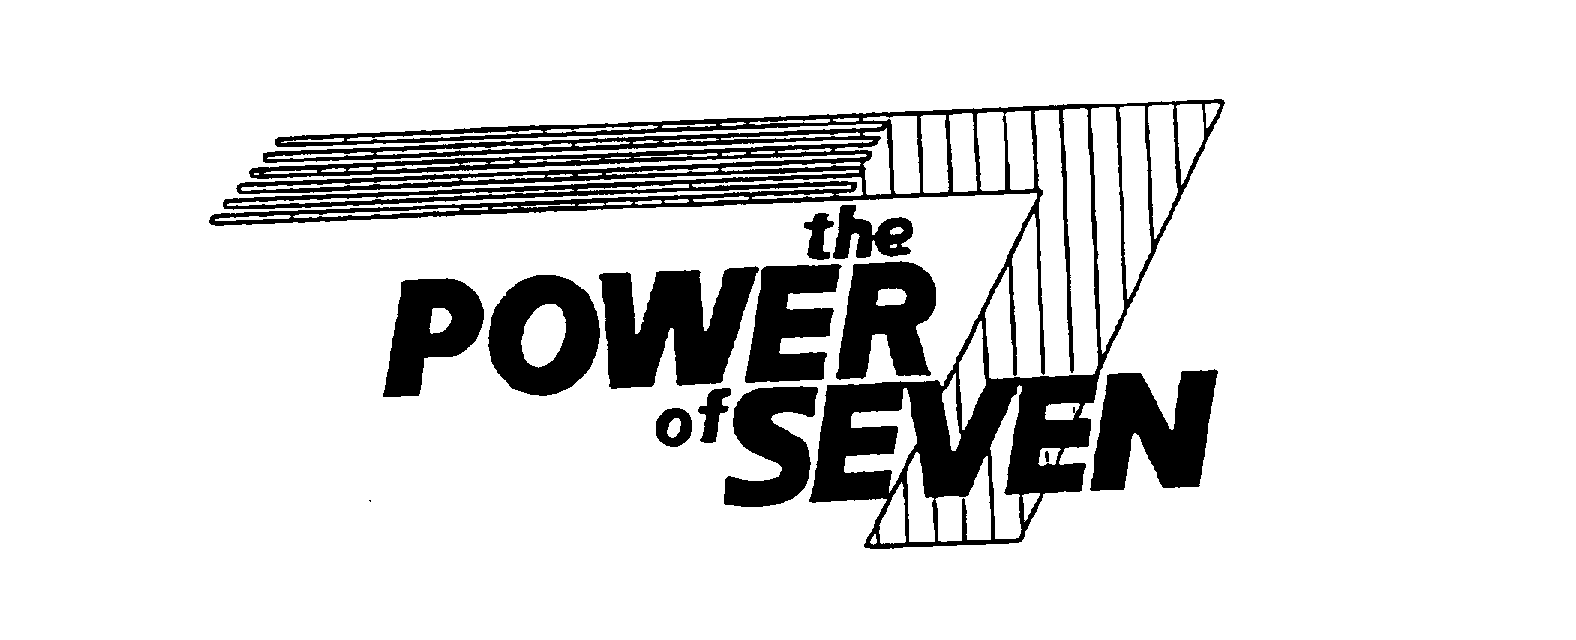  THE POWER OF SEVEN